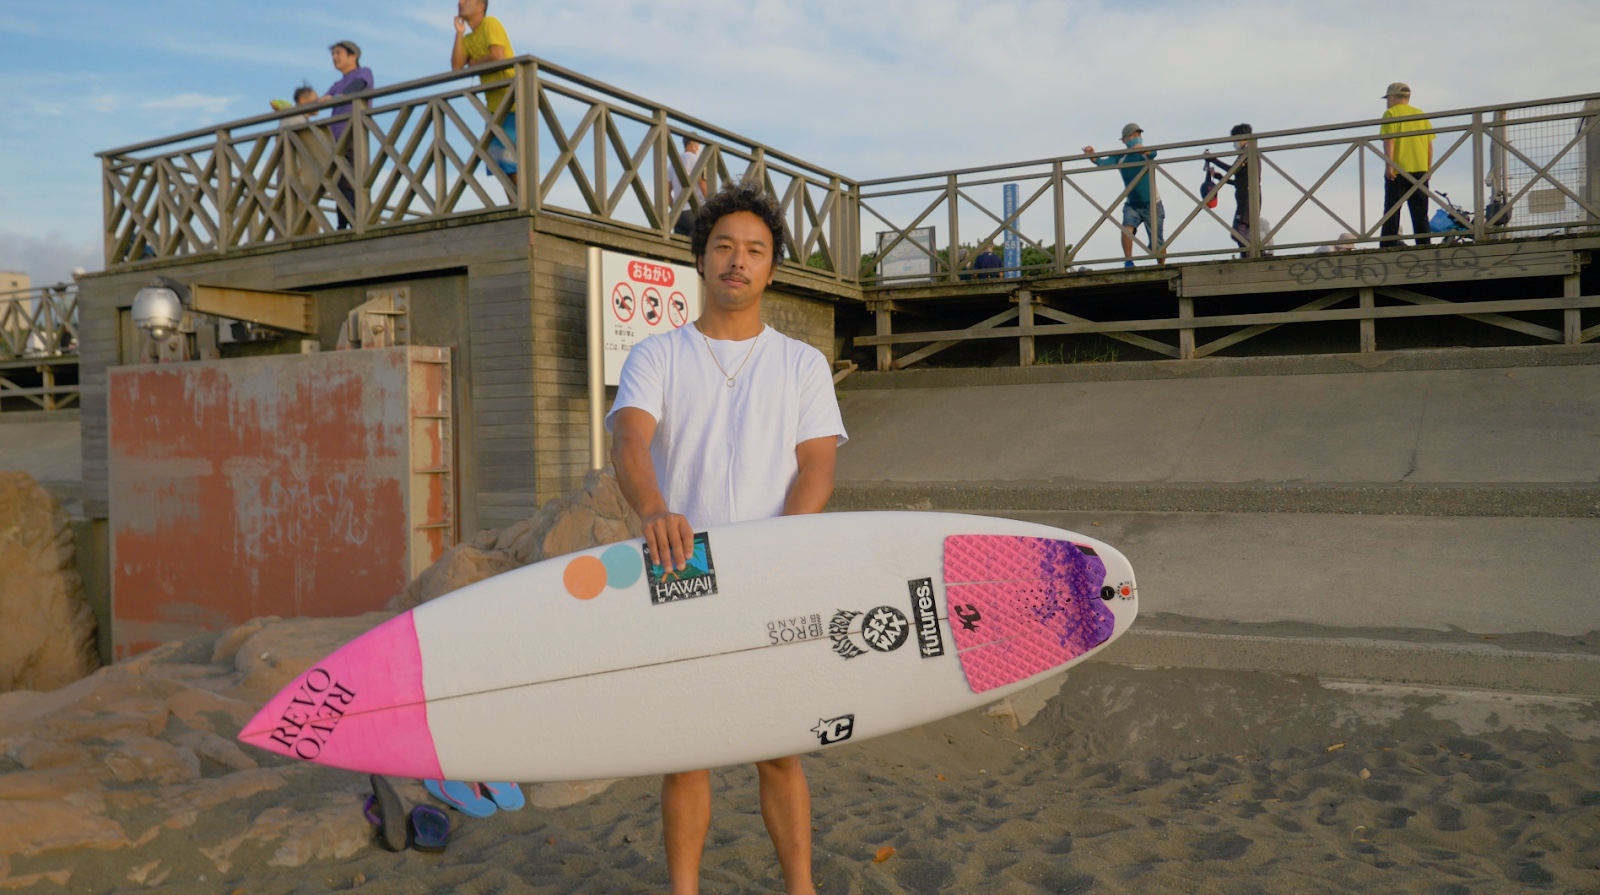 STAB in the dark2022で話題のLost SurfBoards「Driver 3.0」 | Quiiver